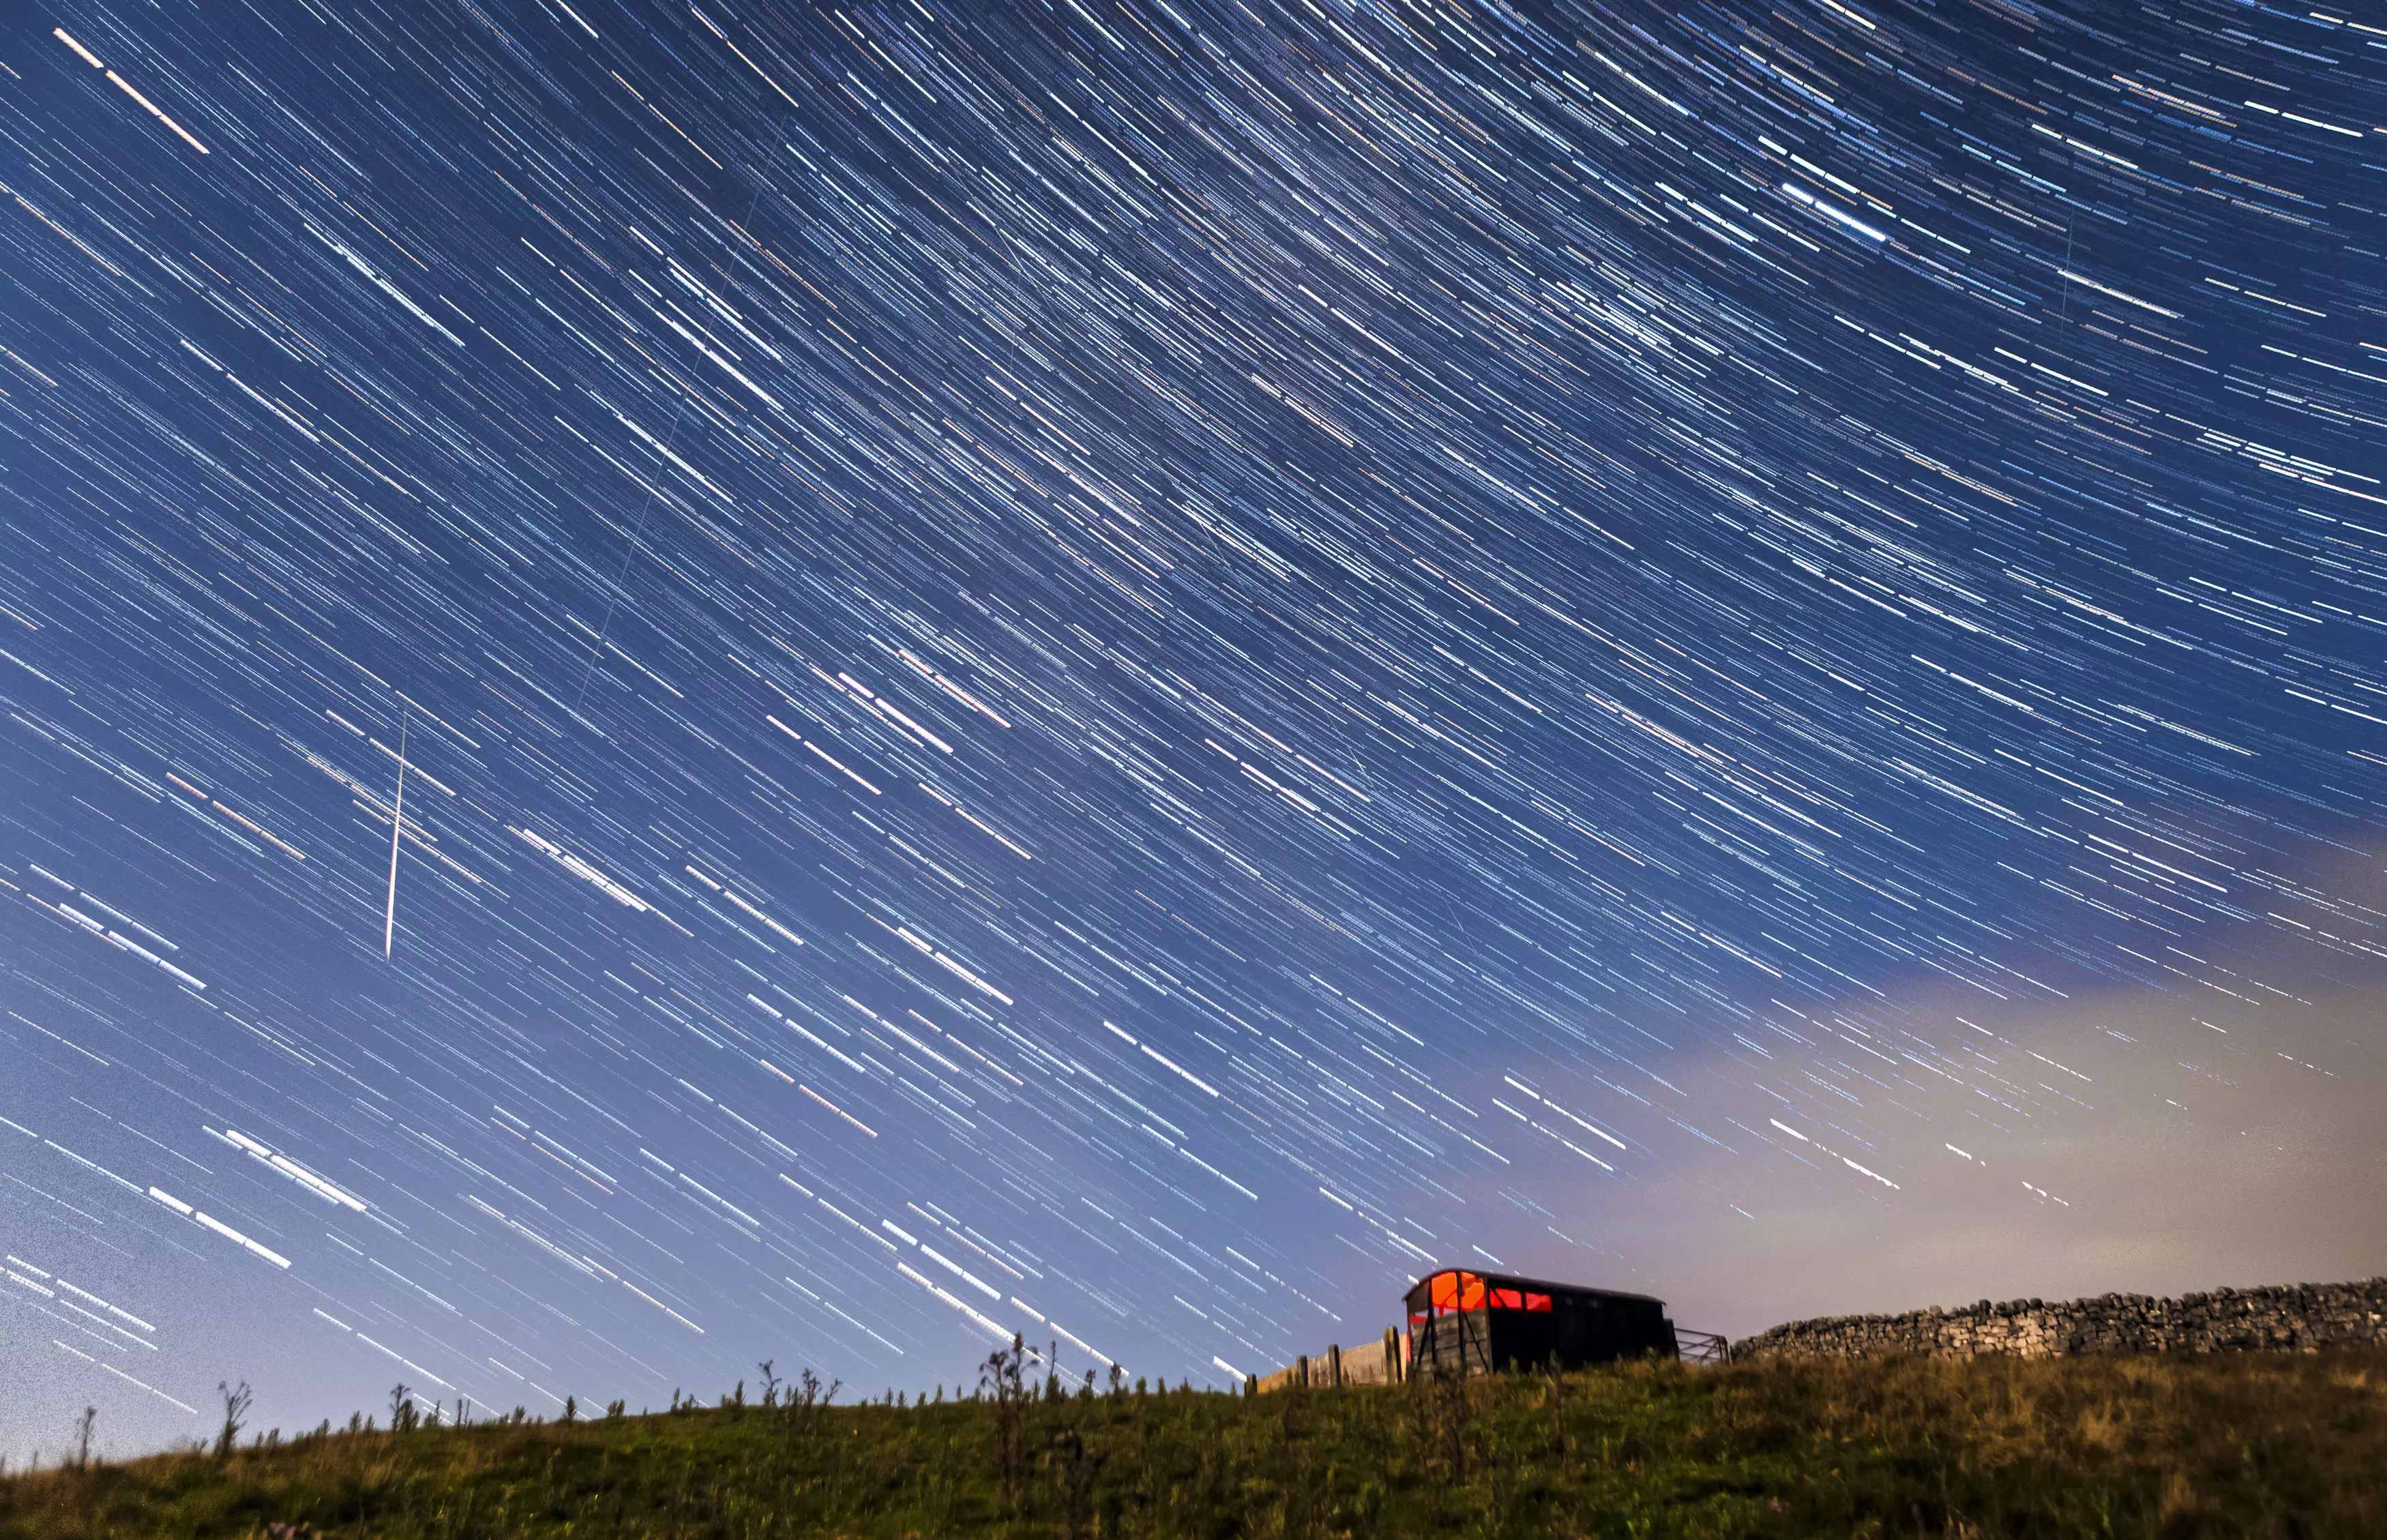 A digital composite of 30 photographs taken over a period of 15 minutes during the Perseid meteor shower in the Yorkshire Dales National Park.